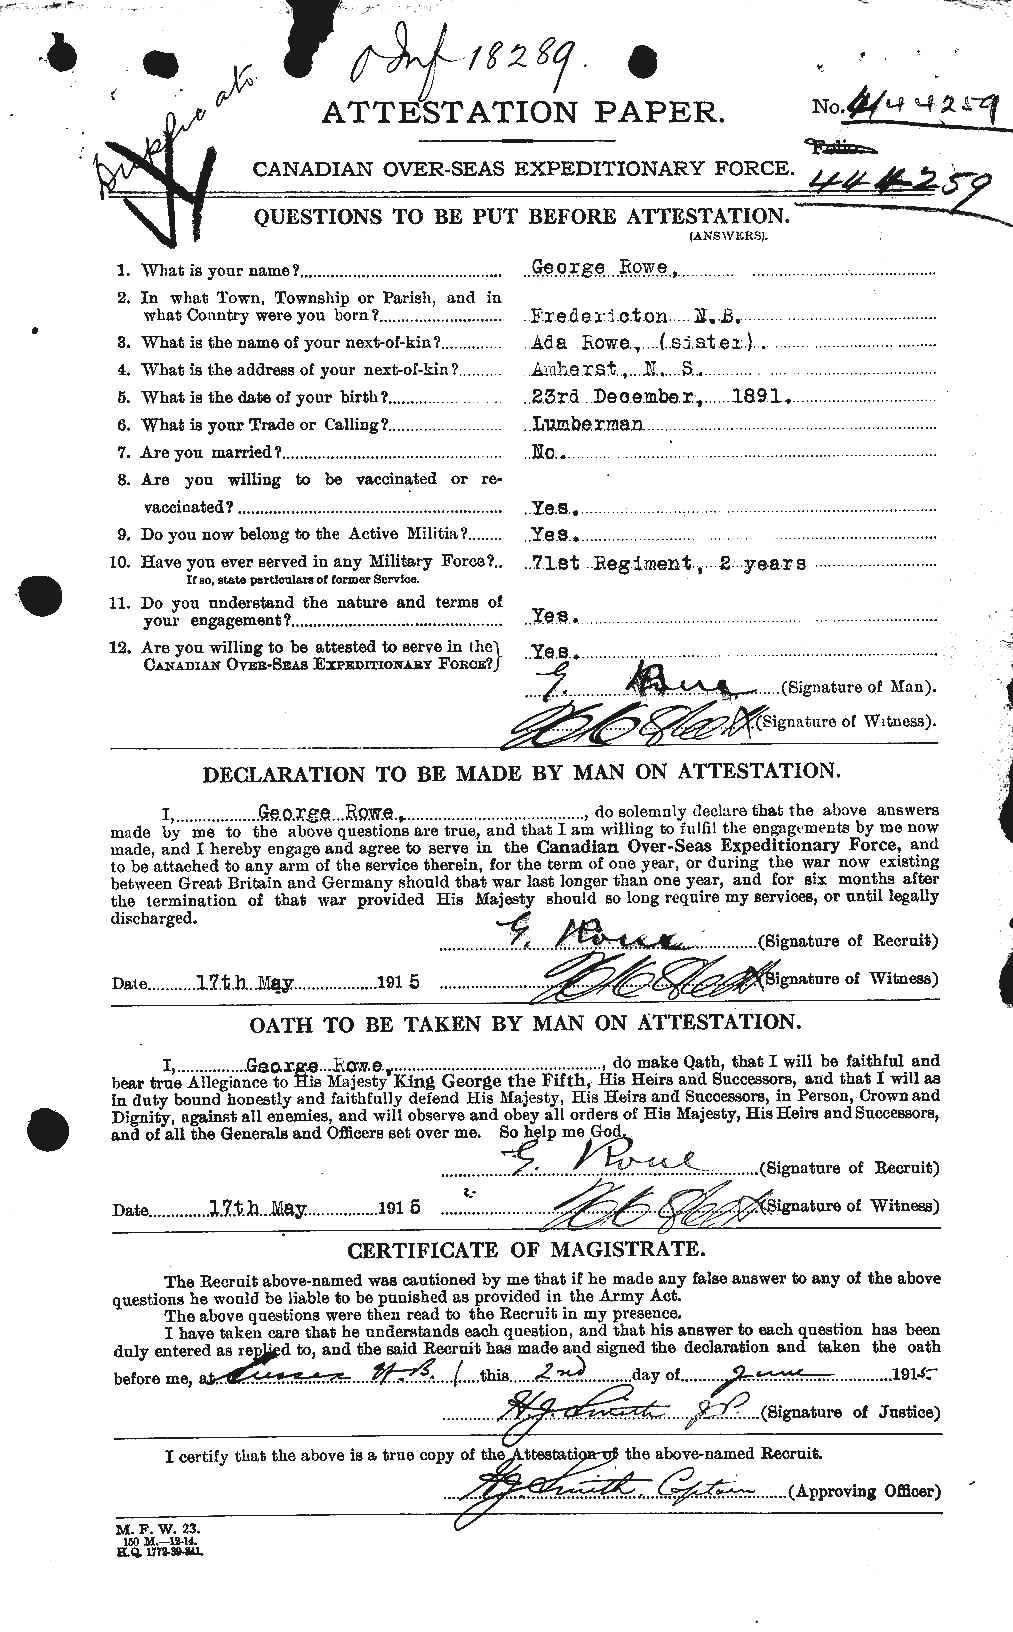 Personnel Records of the First World War - CEF 615874a